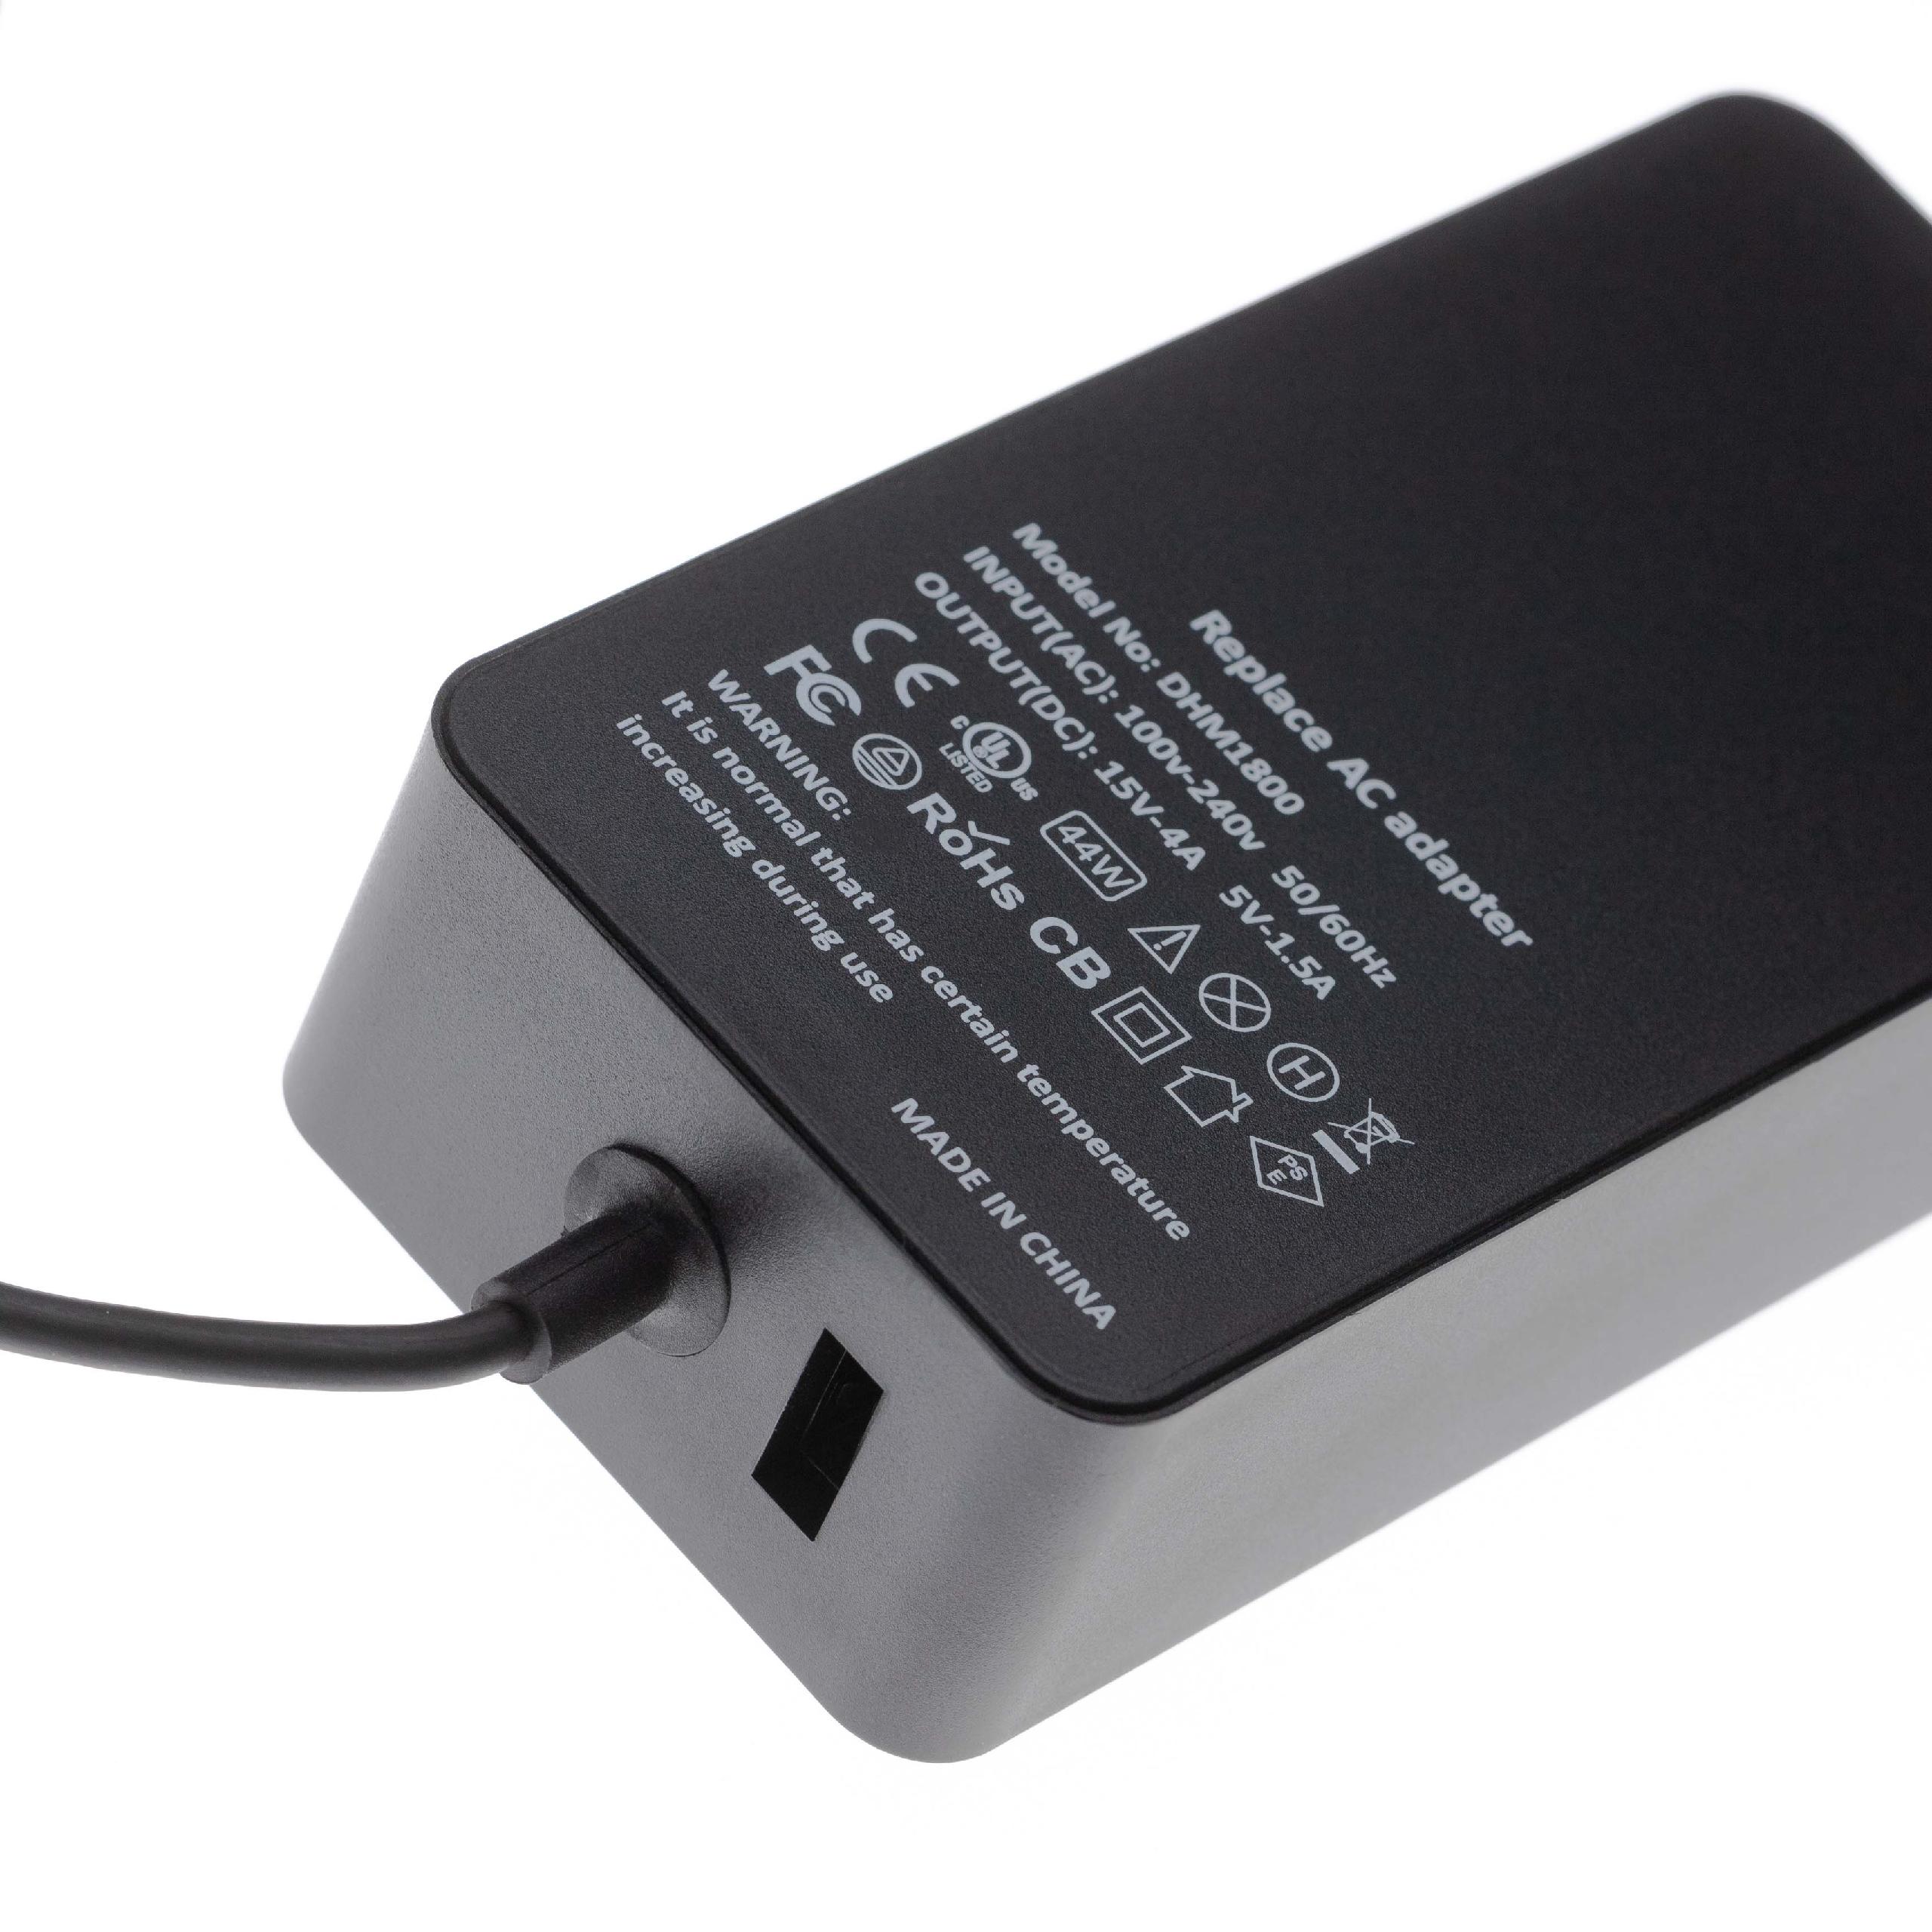 Mains Power Adapter replaces Microsoft 1076 for Tablet - USB Port ...